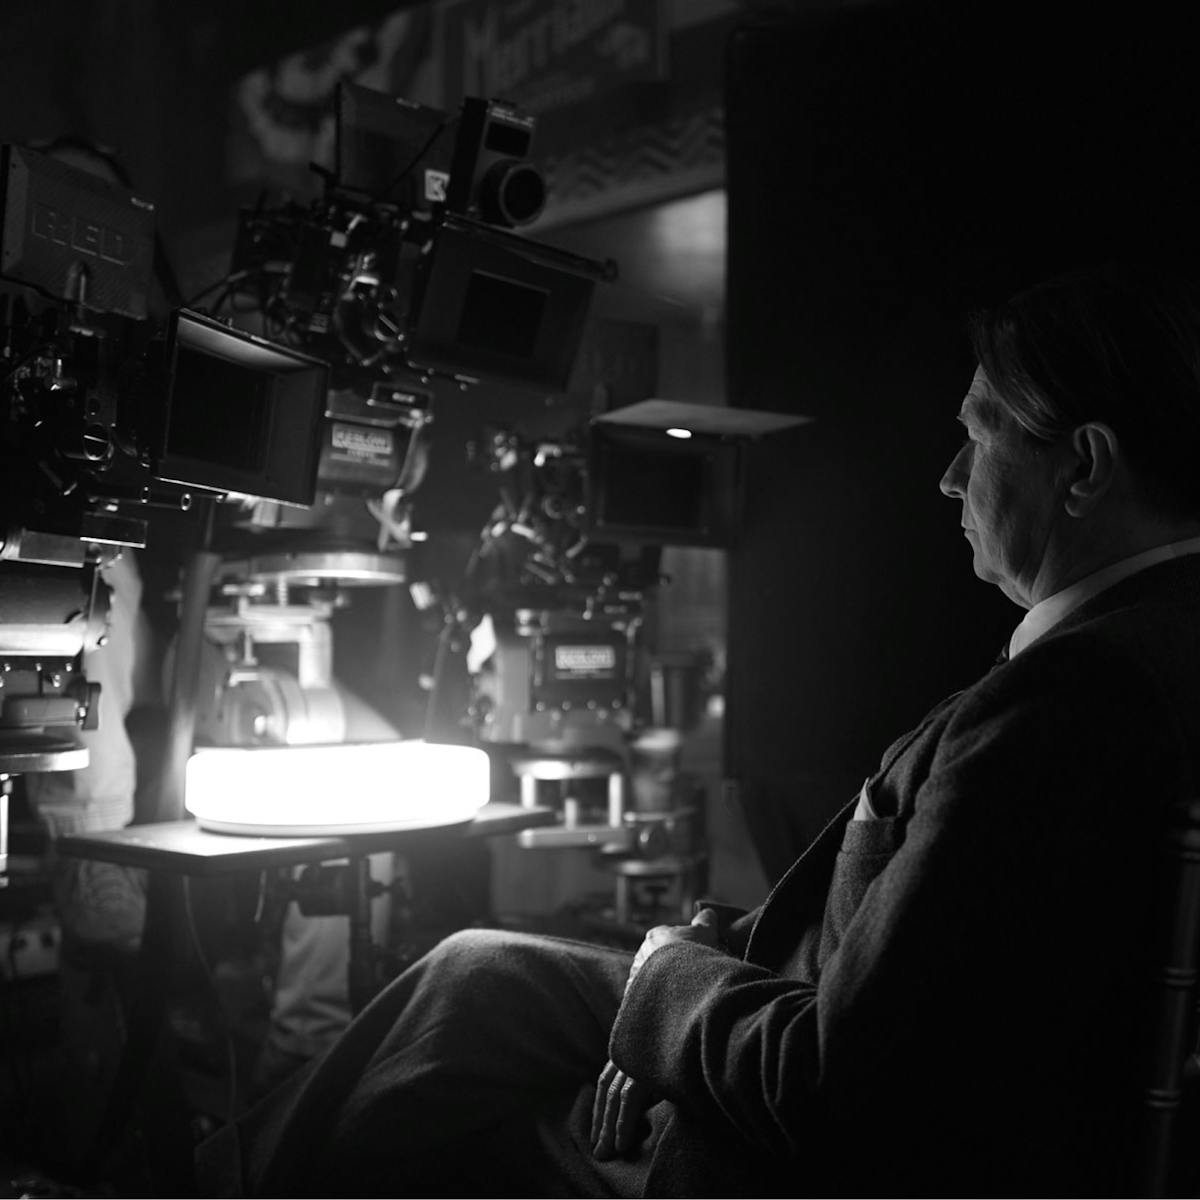 Gary Oldman in costume as Herman J. Mankiewicz sits behind a series of cameras on the set of Mank.